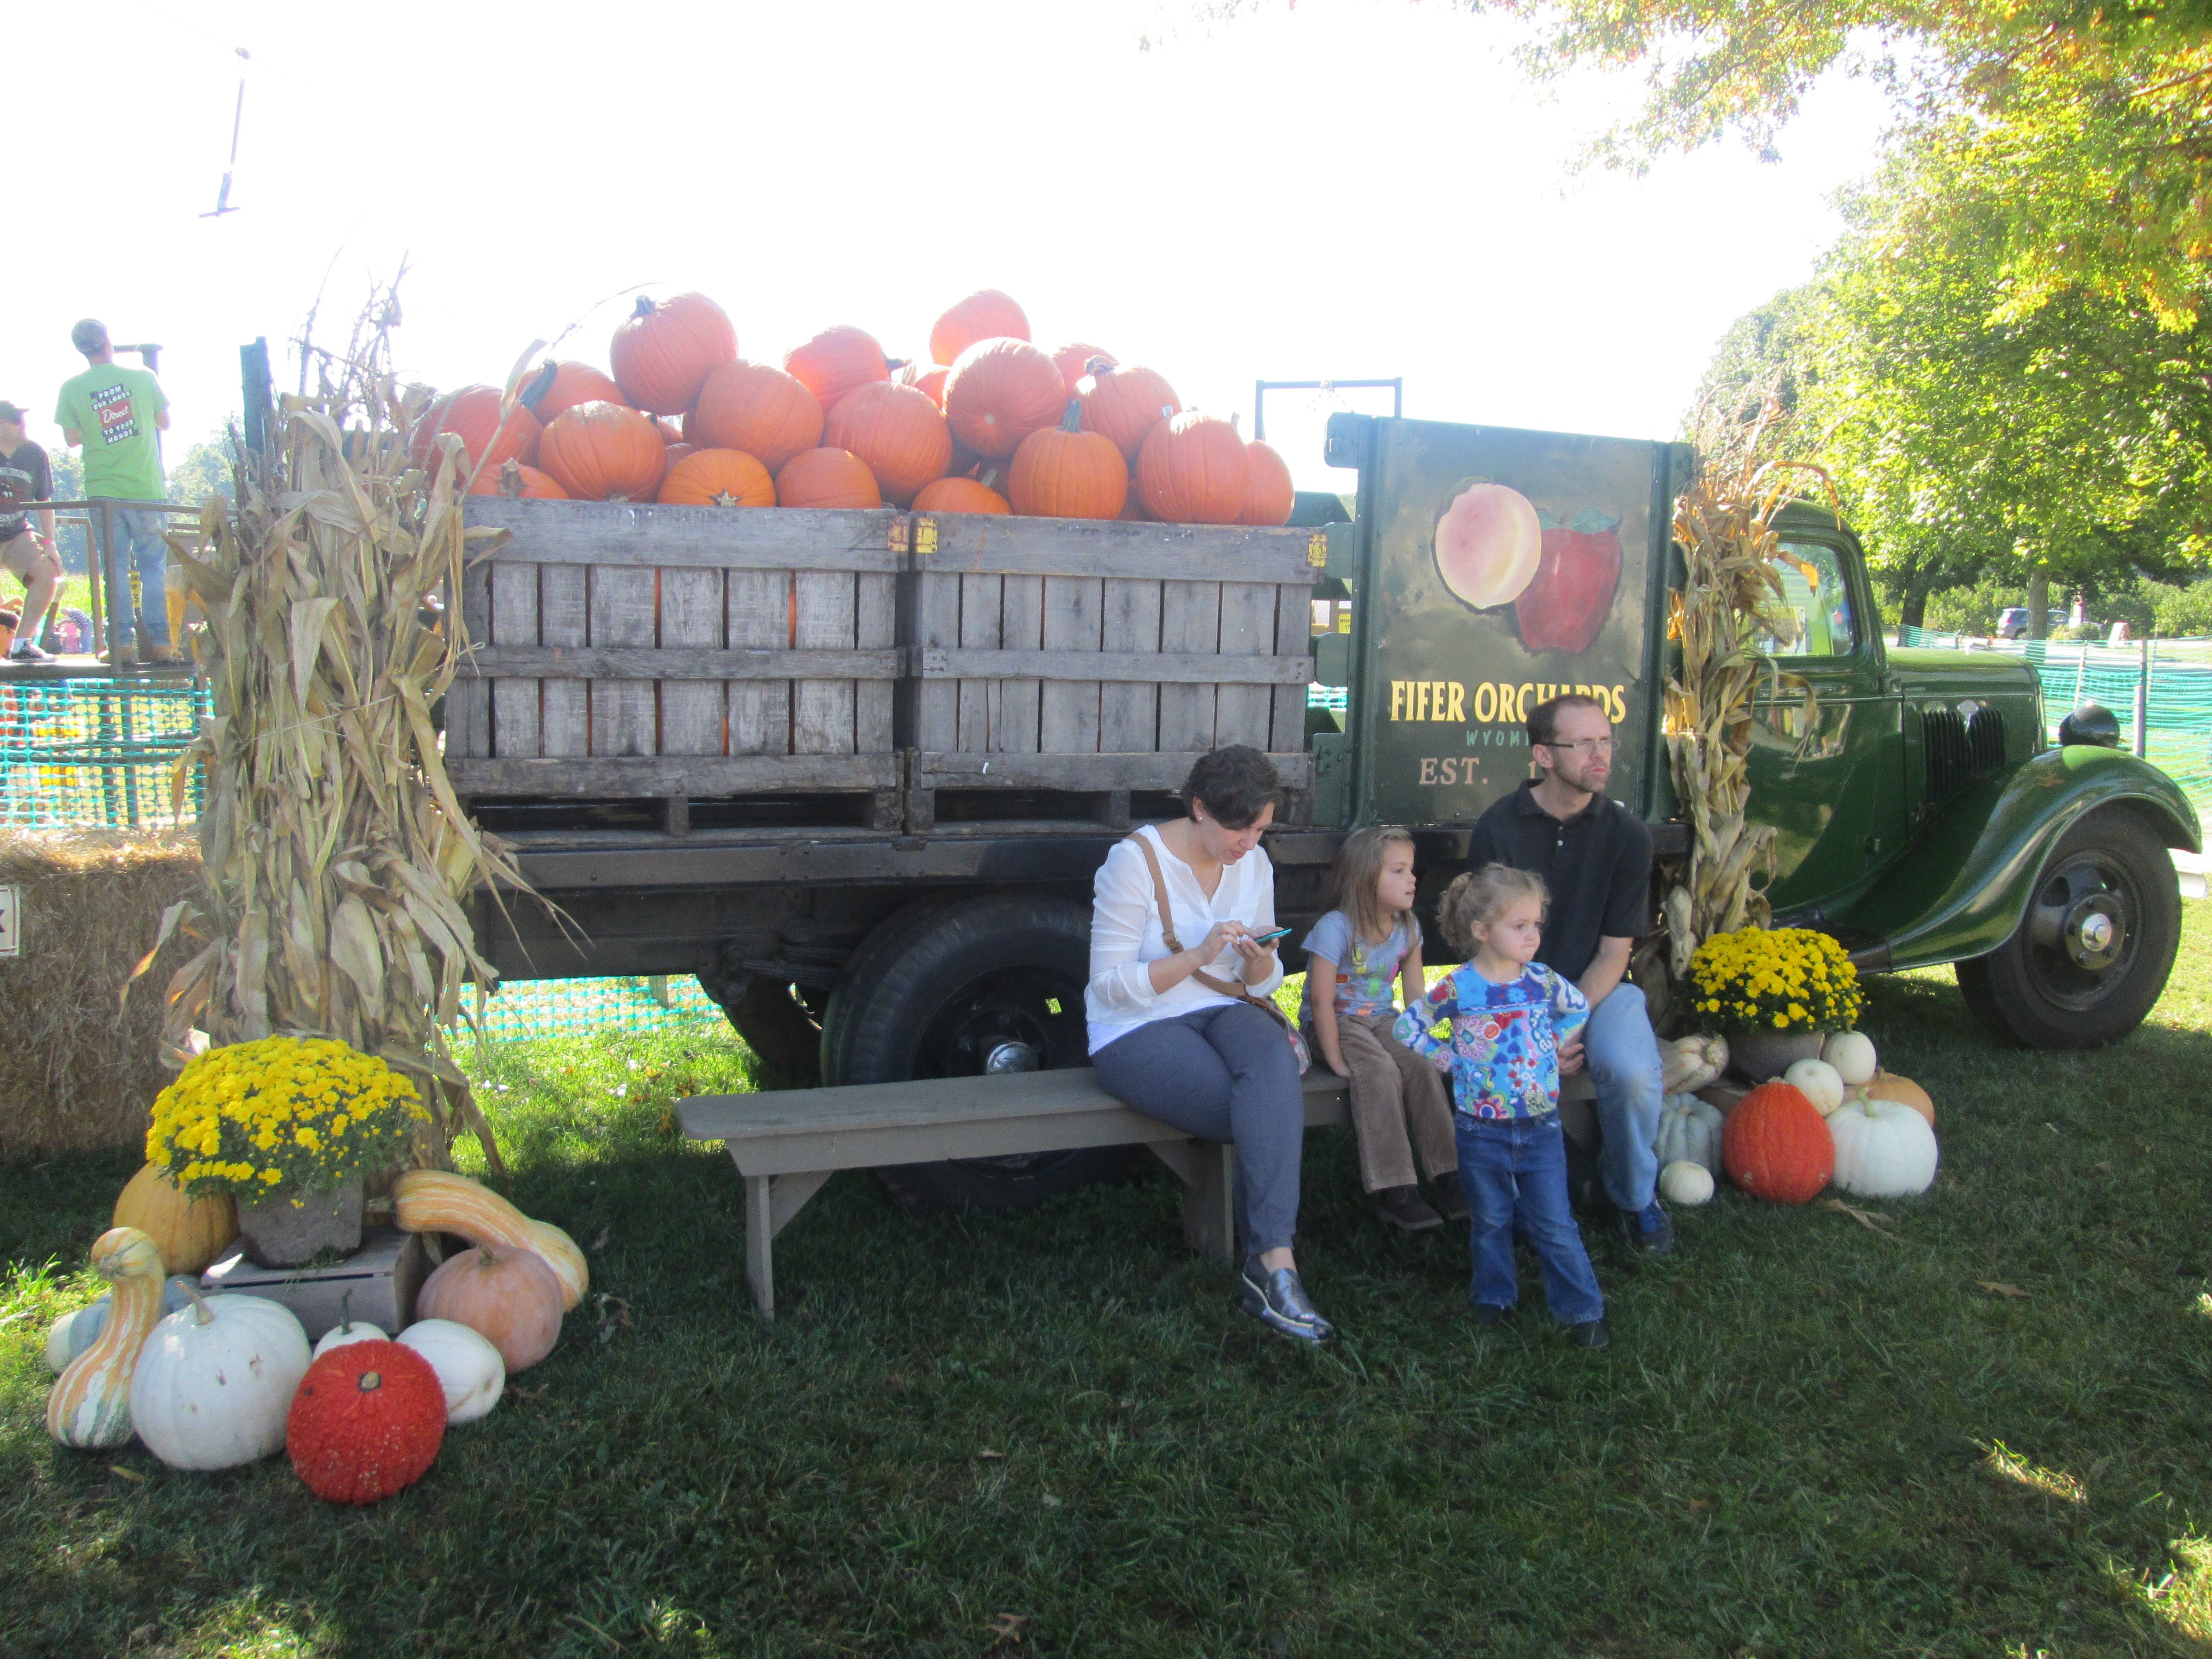 Fall Festivities Abound at Fifer Orchards in Delaware | Shorebread